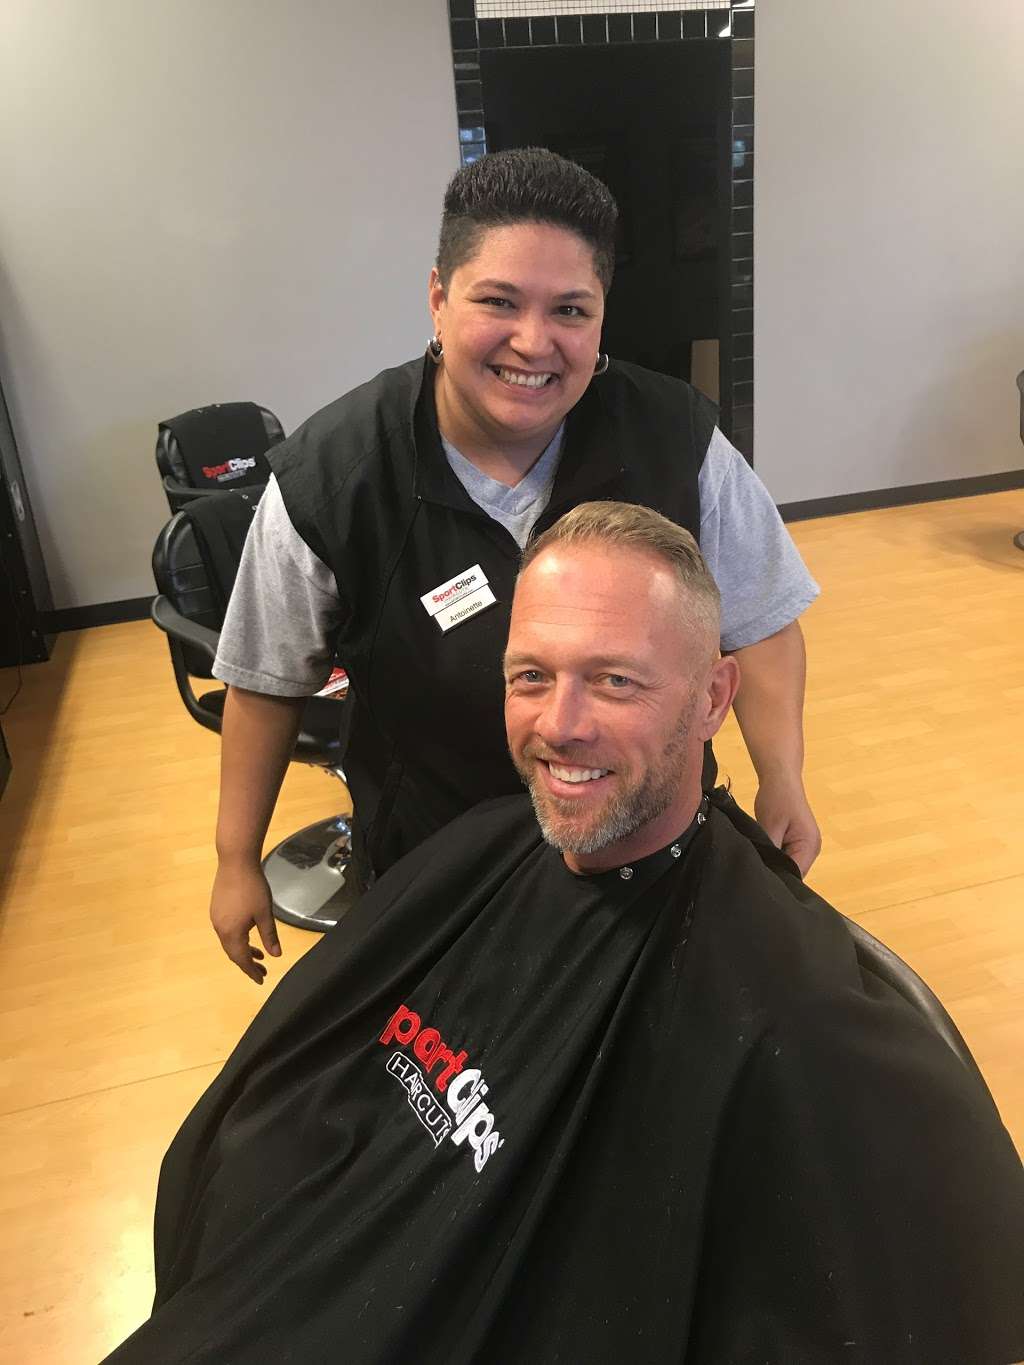 Sport Clips Haircuts of Lakewood | 2589 S Lewis Way Unit 6C, Lakewood, CO 80227 | Phone: (303) 986-2134